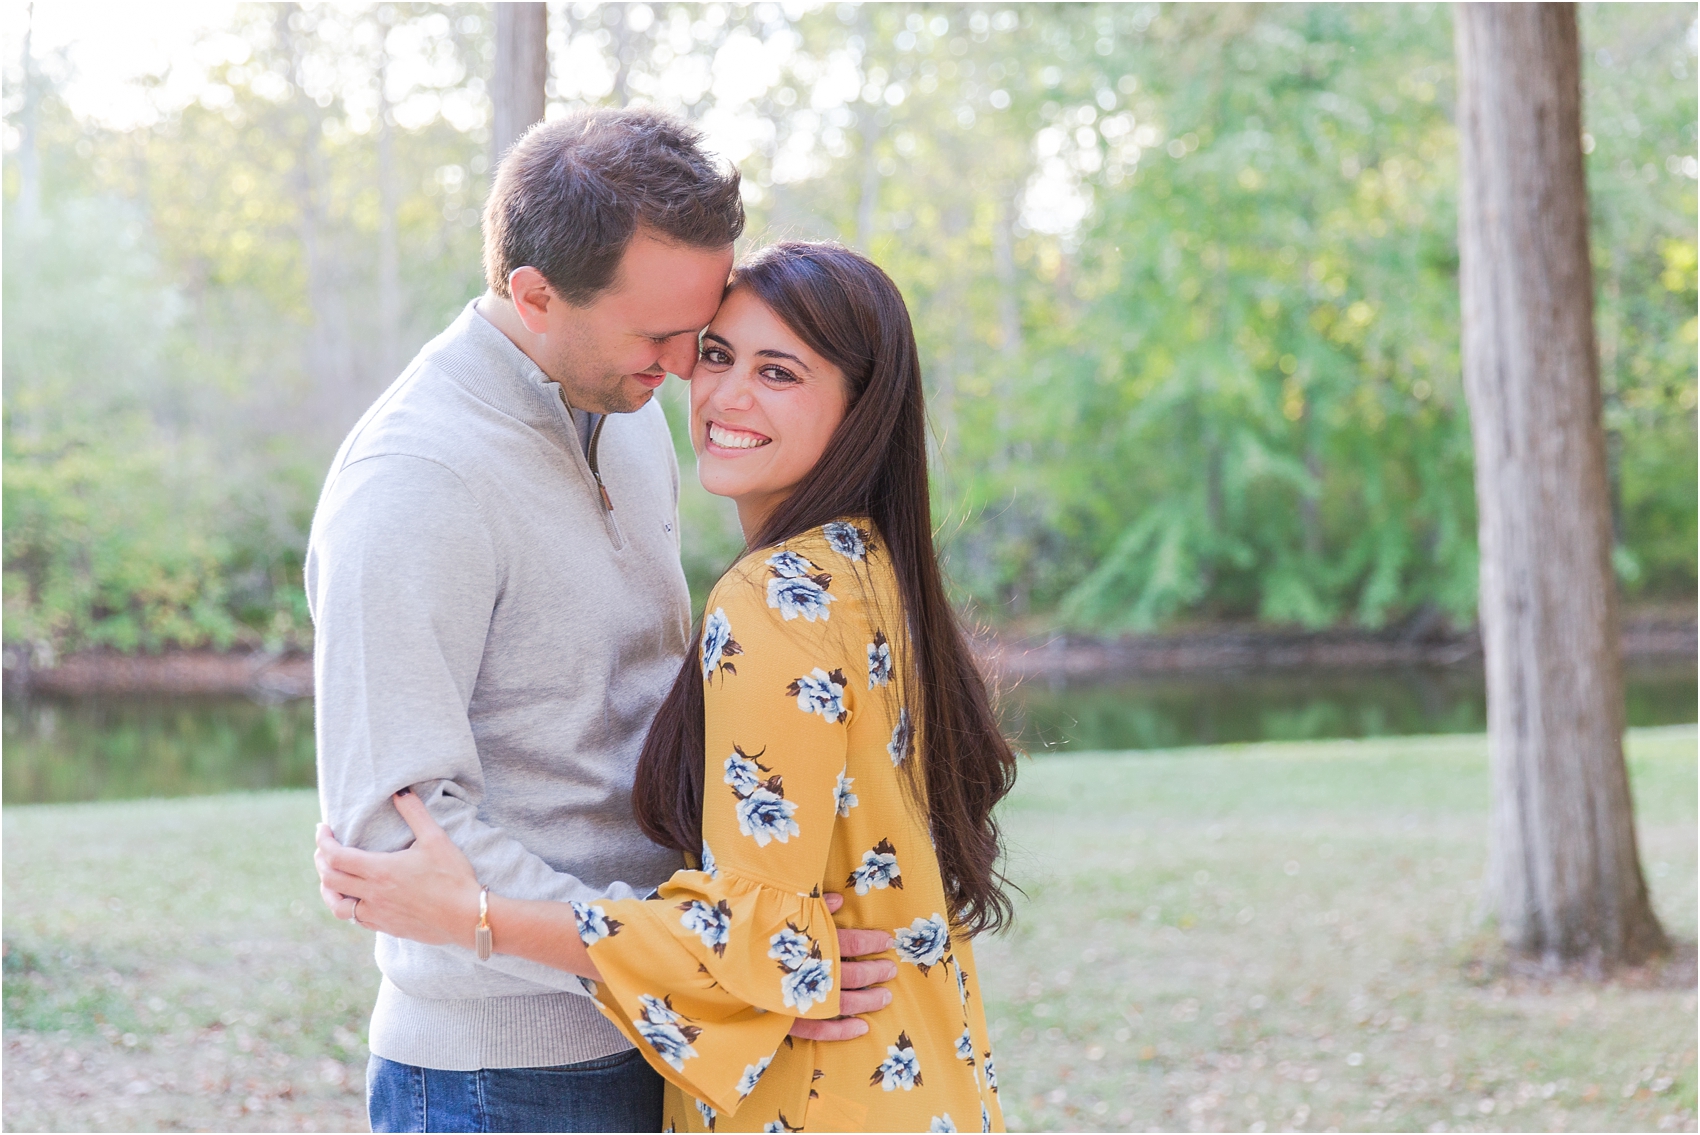 relaxed-autumn-engagement-photos-at-hudson-mills-metropark-in-dexter-mi-by-courtney-carolyn-photography_0029.jpg